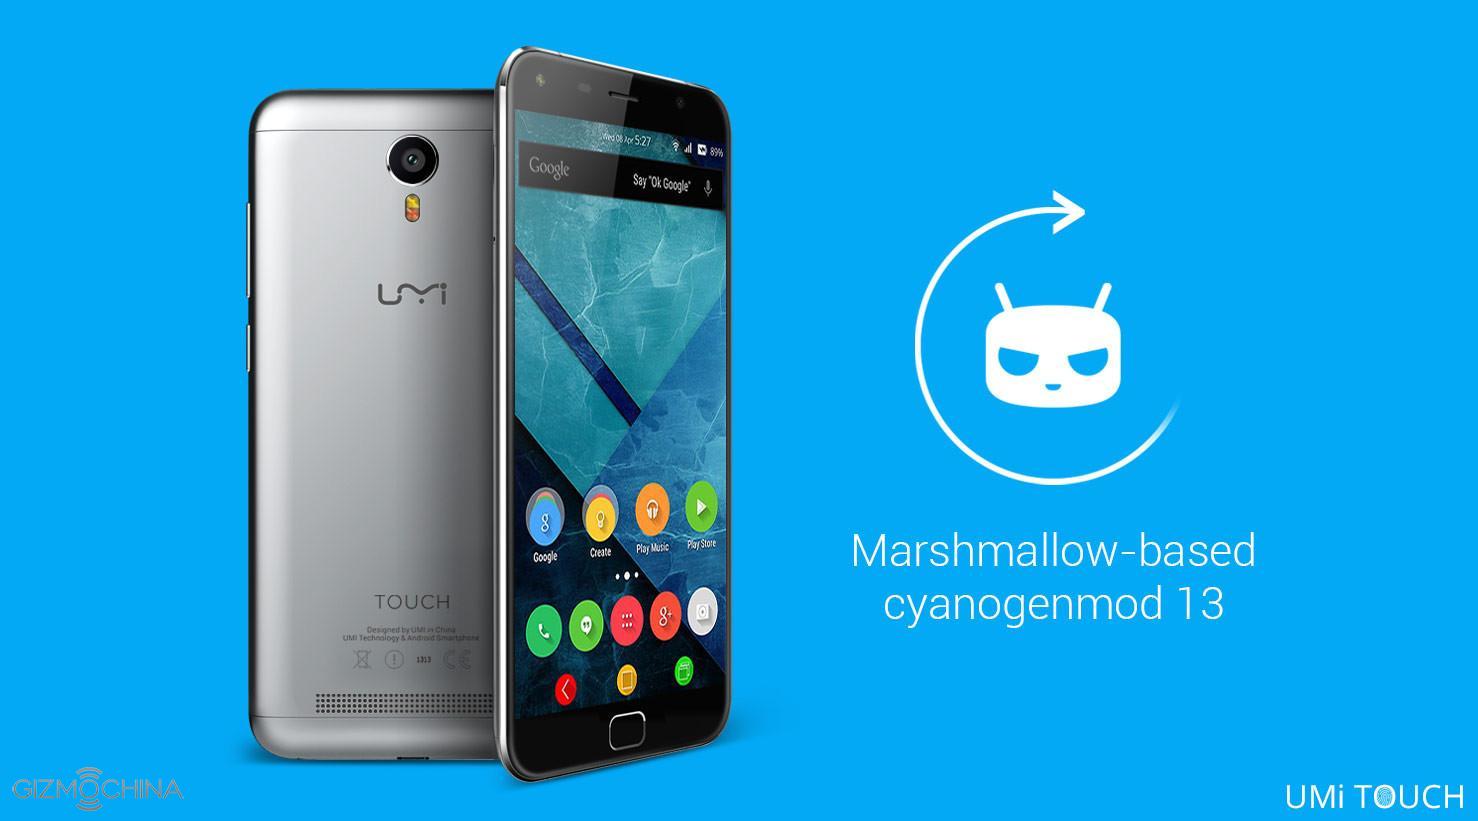 umi touch cm13